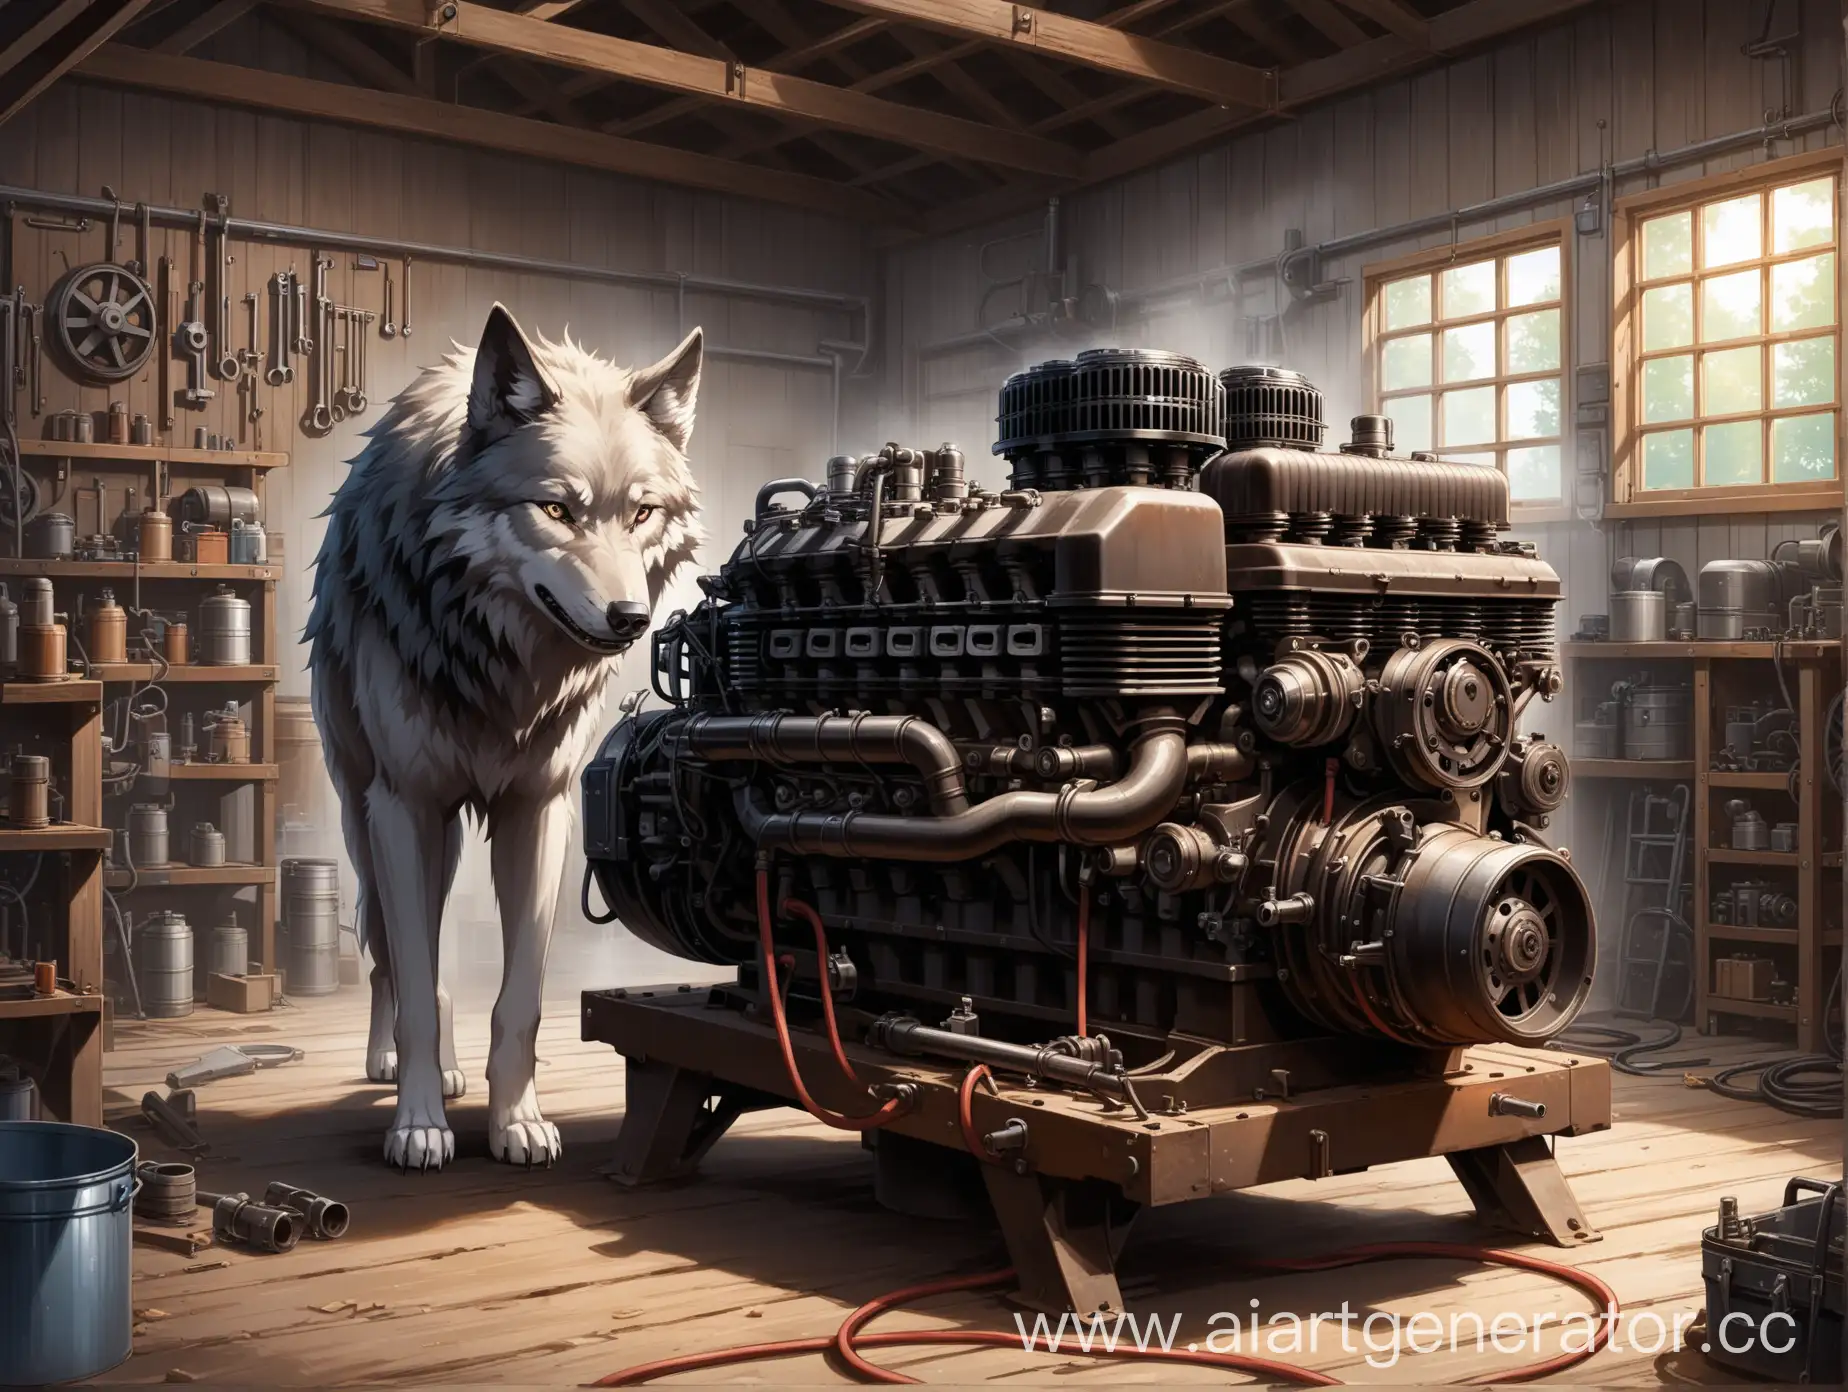 wolf assembles the engine in an old garage